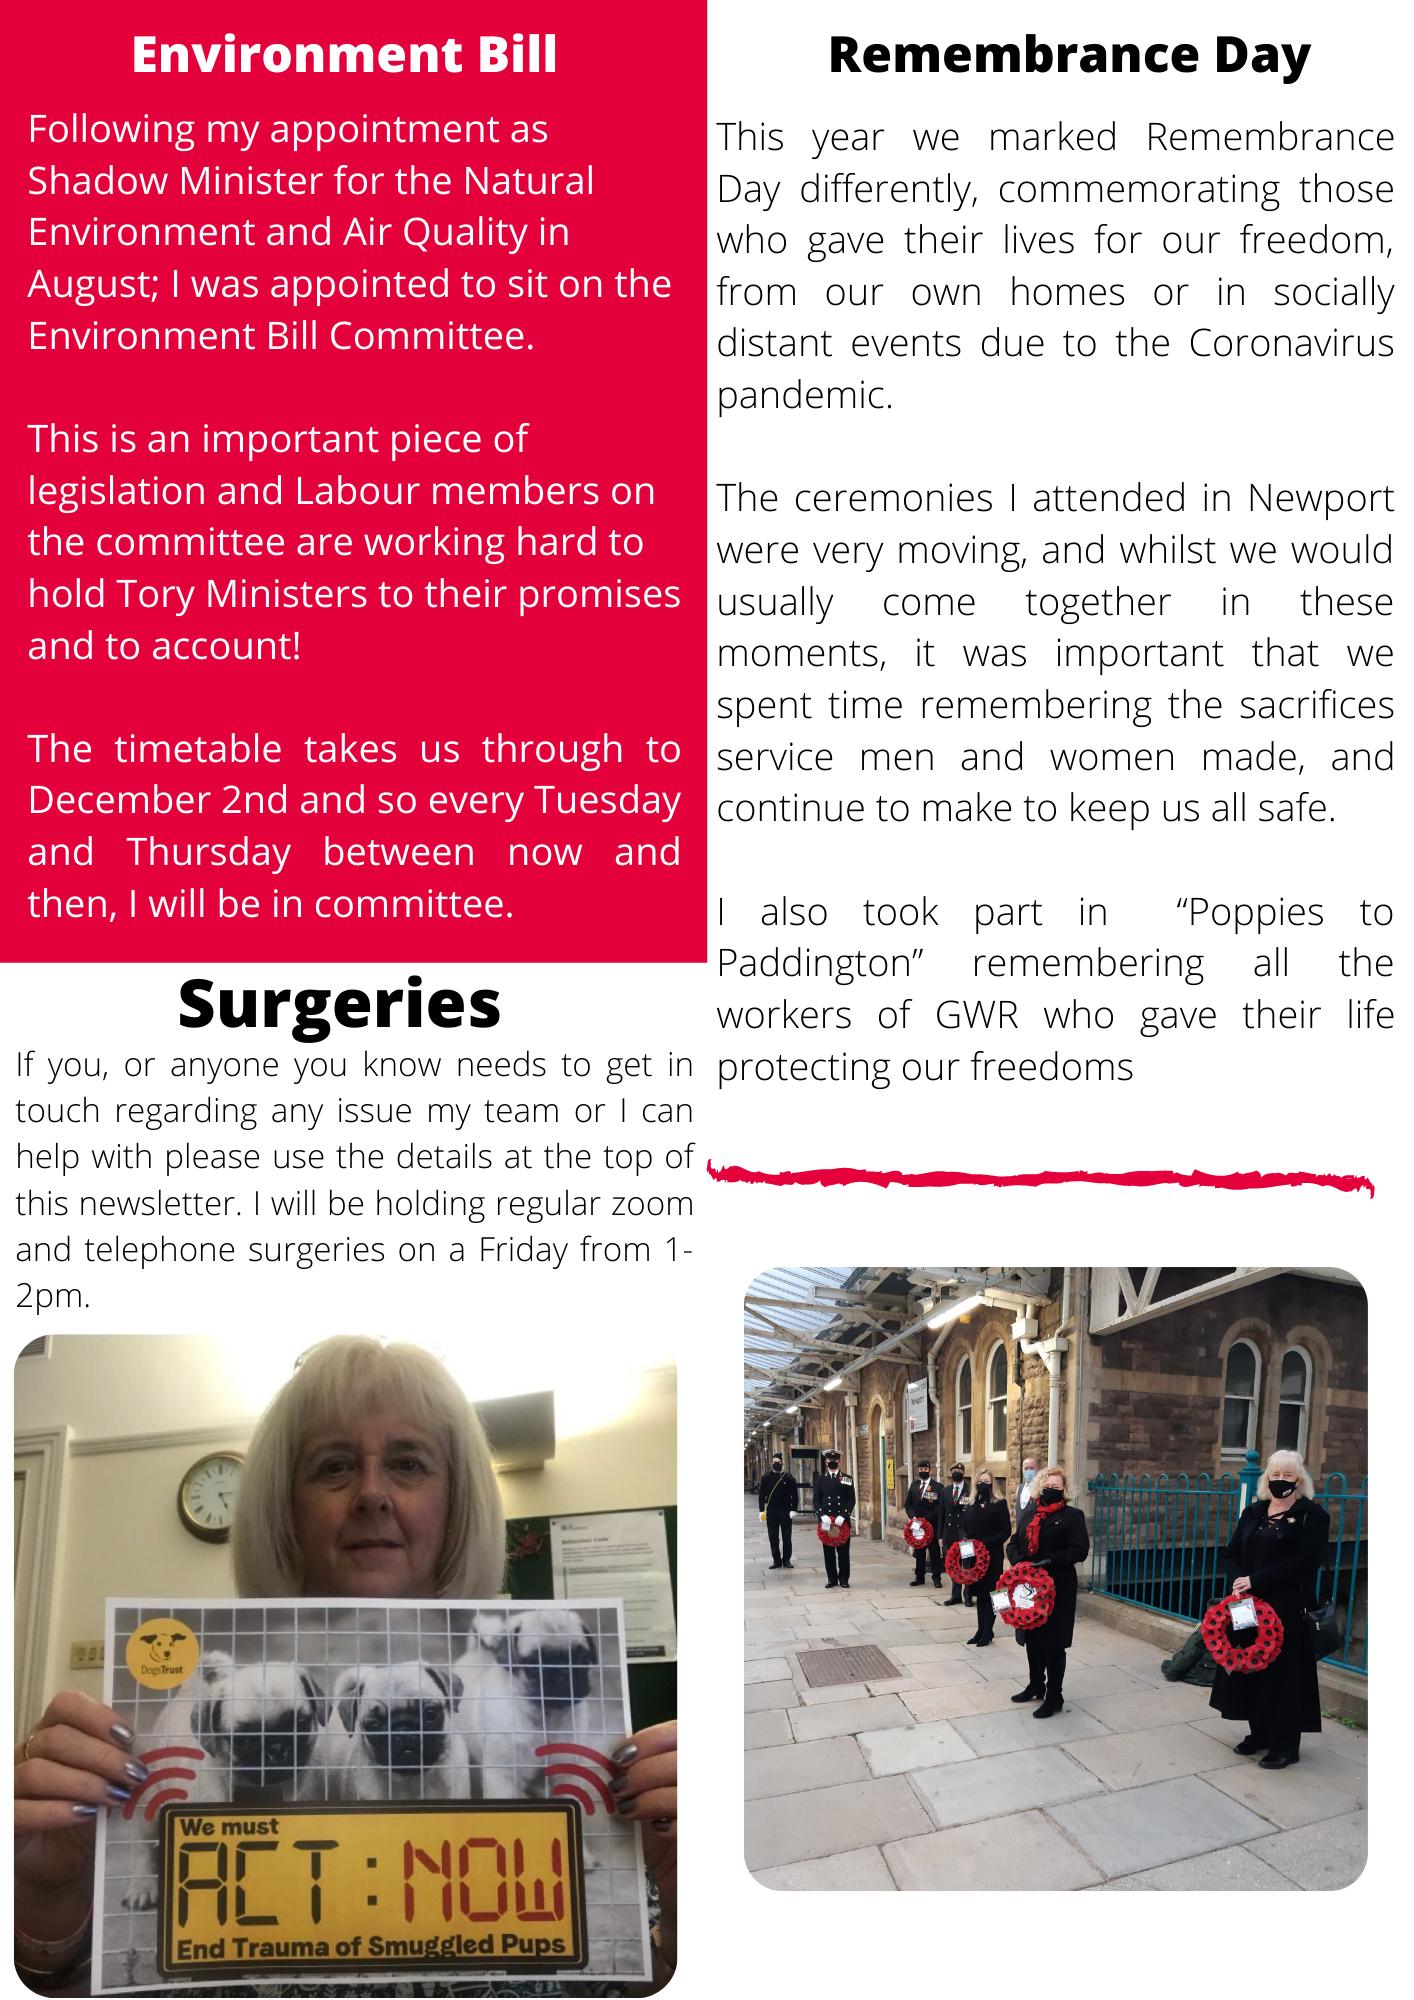 Page 1 of the newsletter